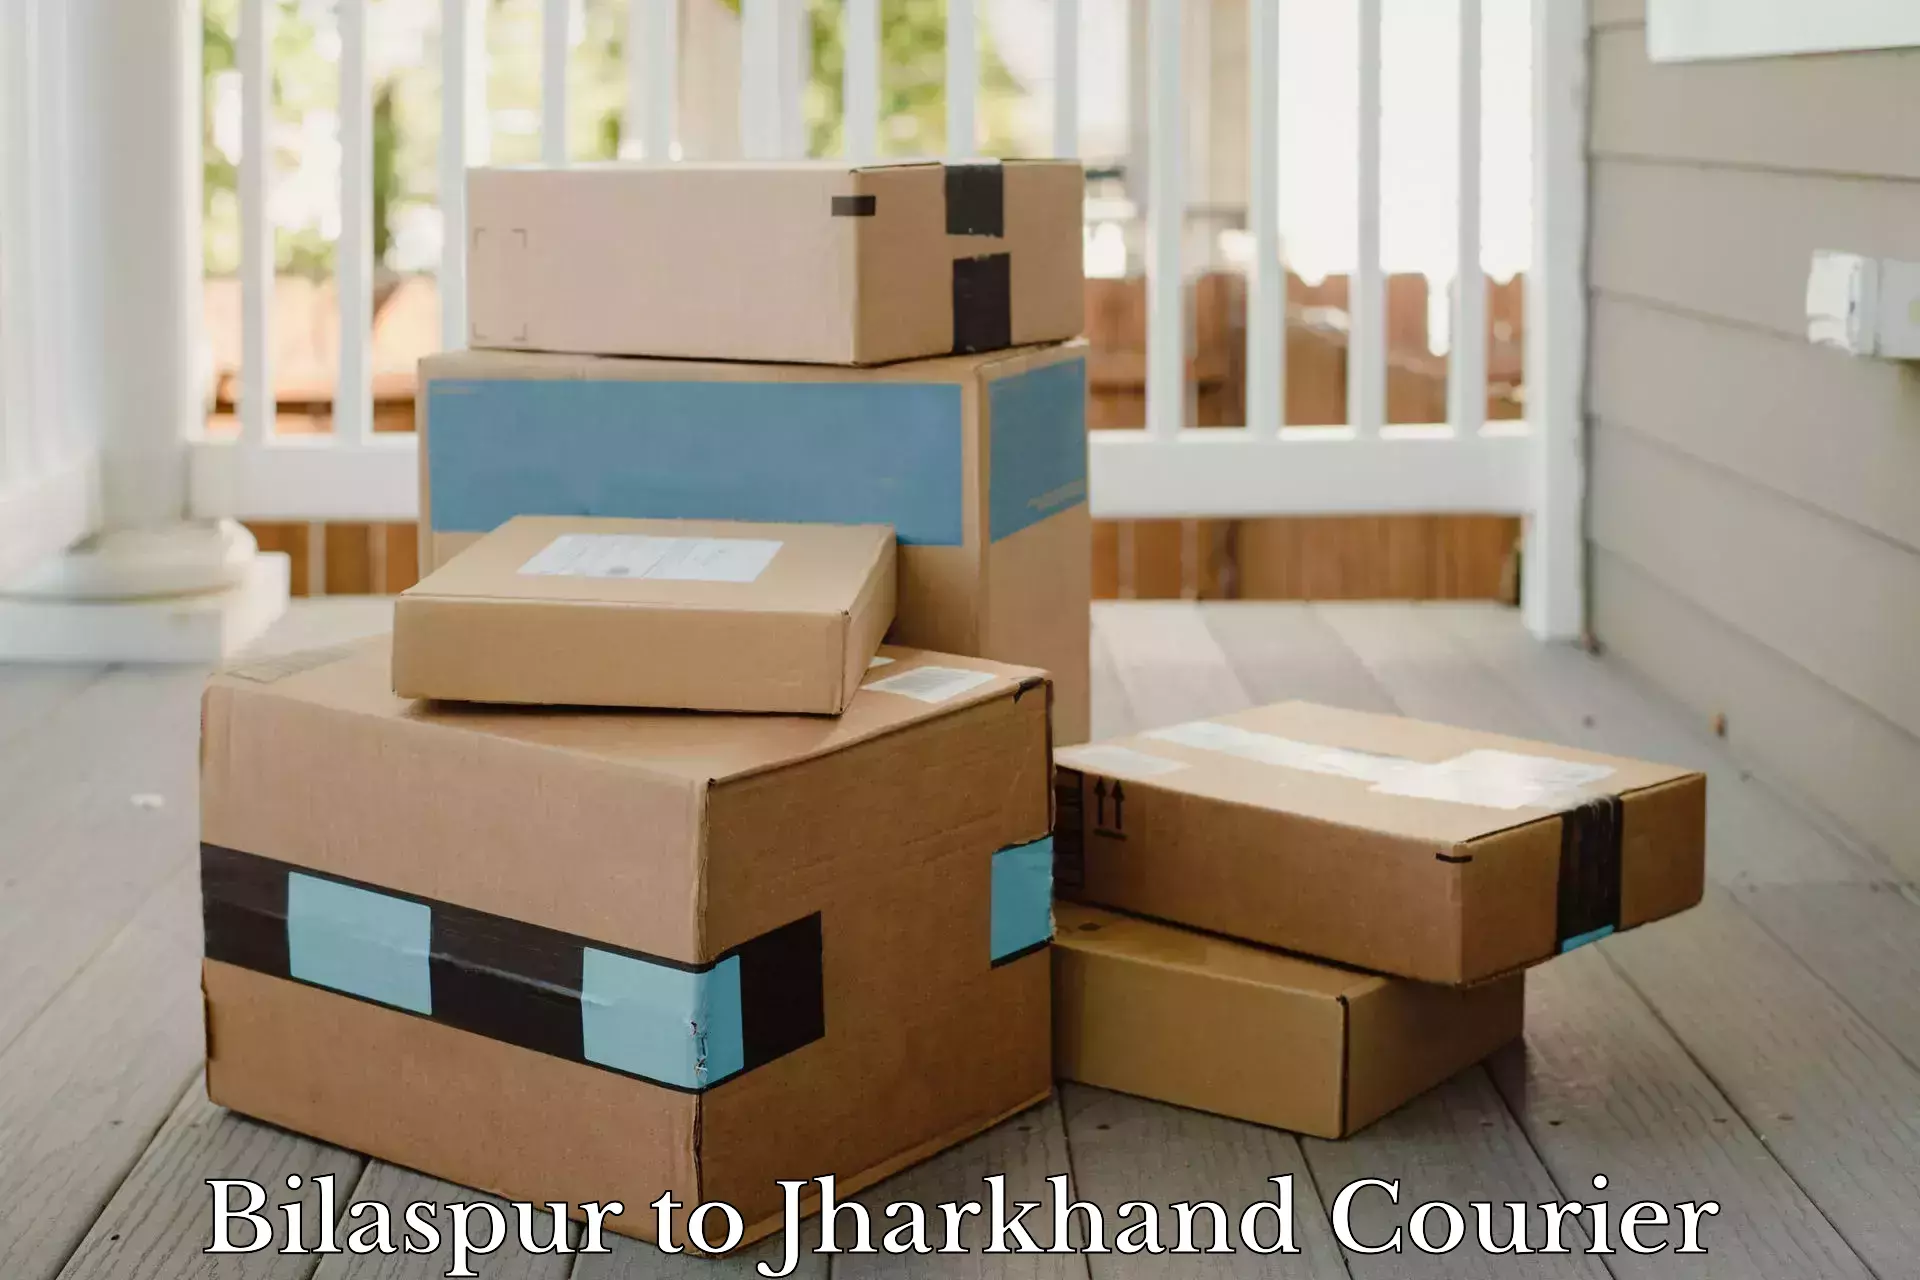 Small parcel delivery Bilaspur to Padma Hazaribagh